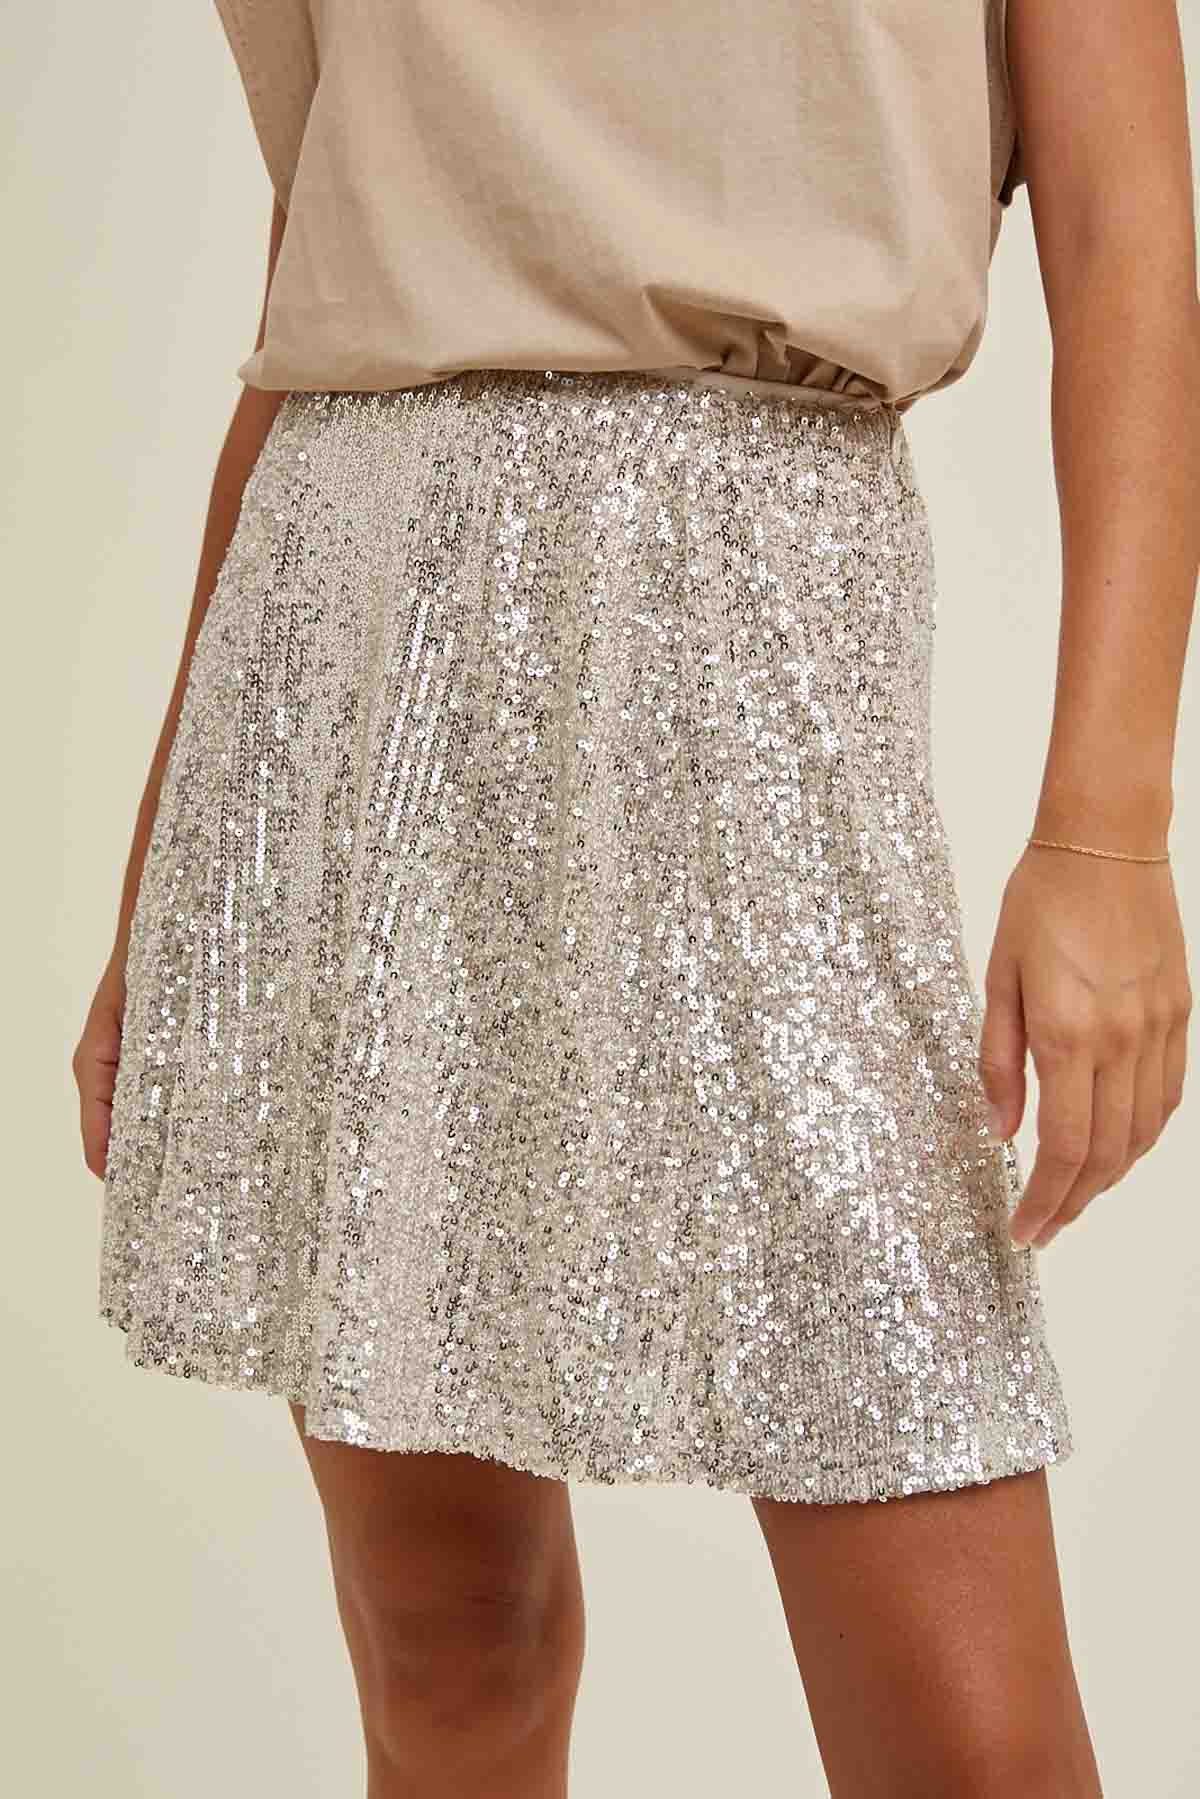 Sequin Mini Skirt in Champagne by Wishlist